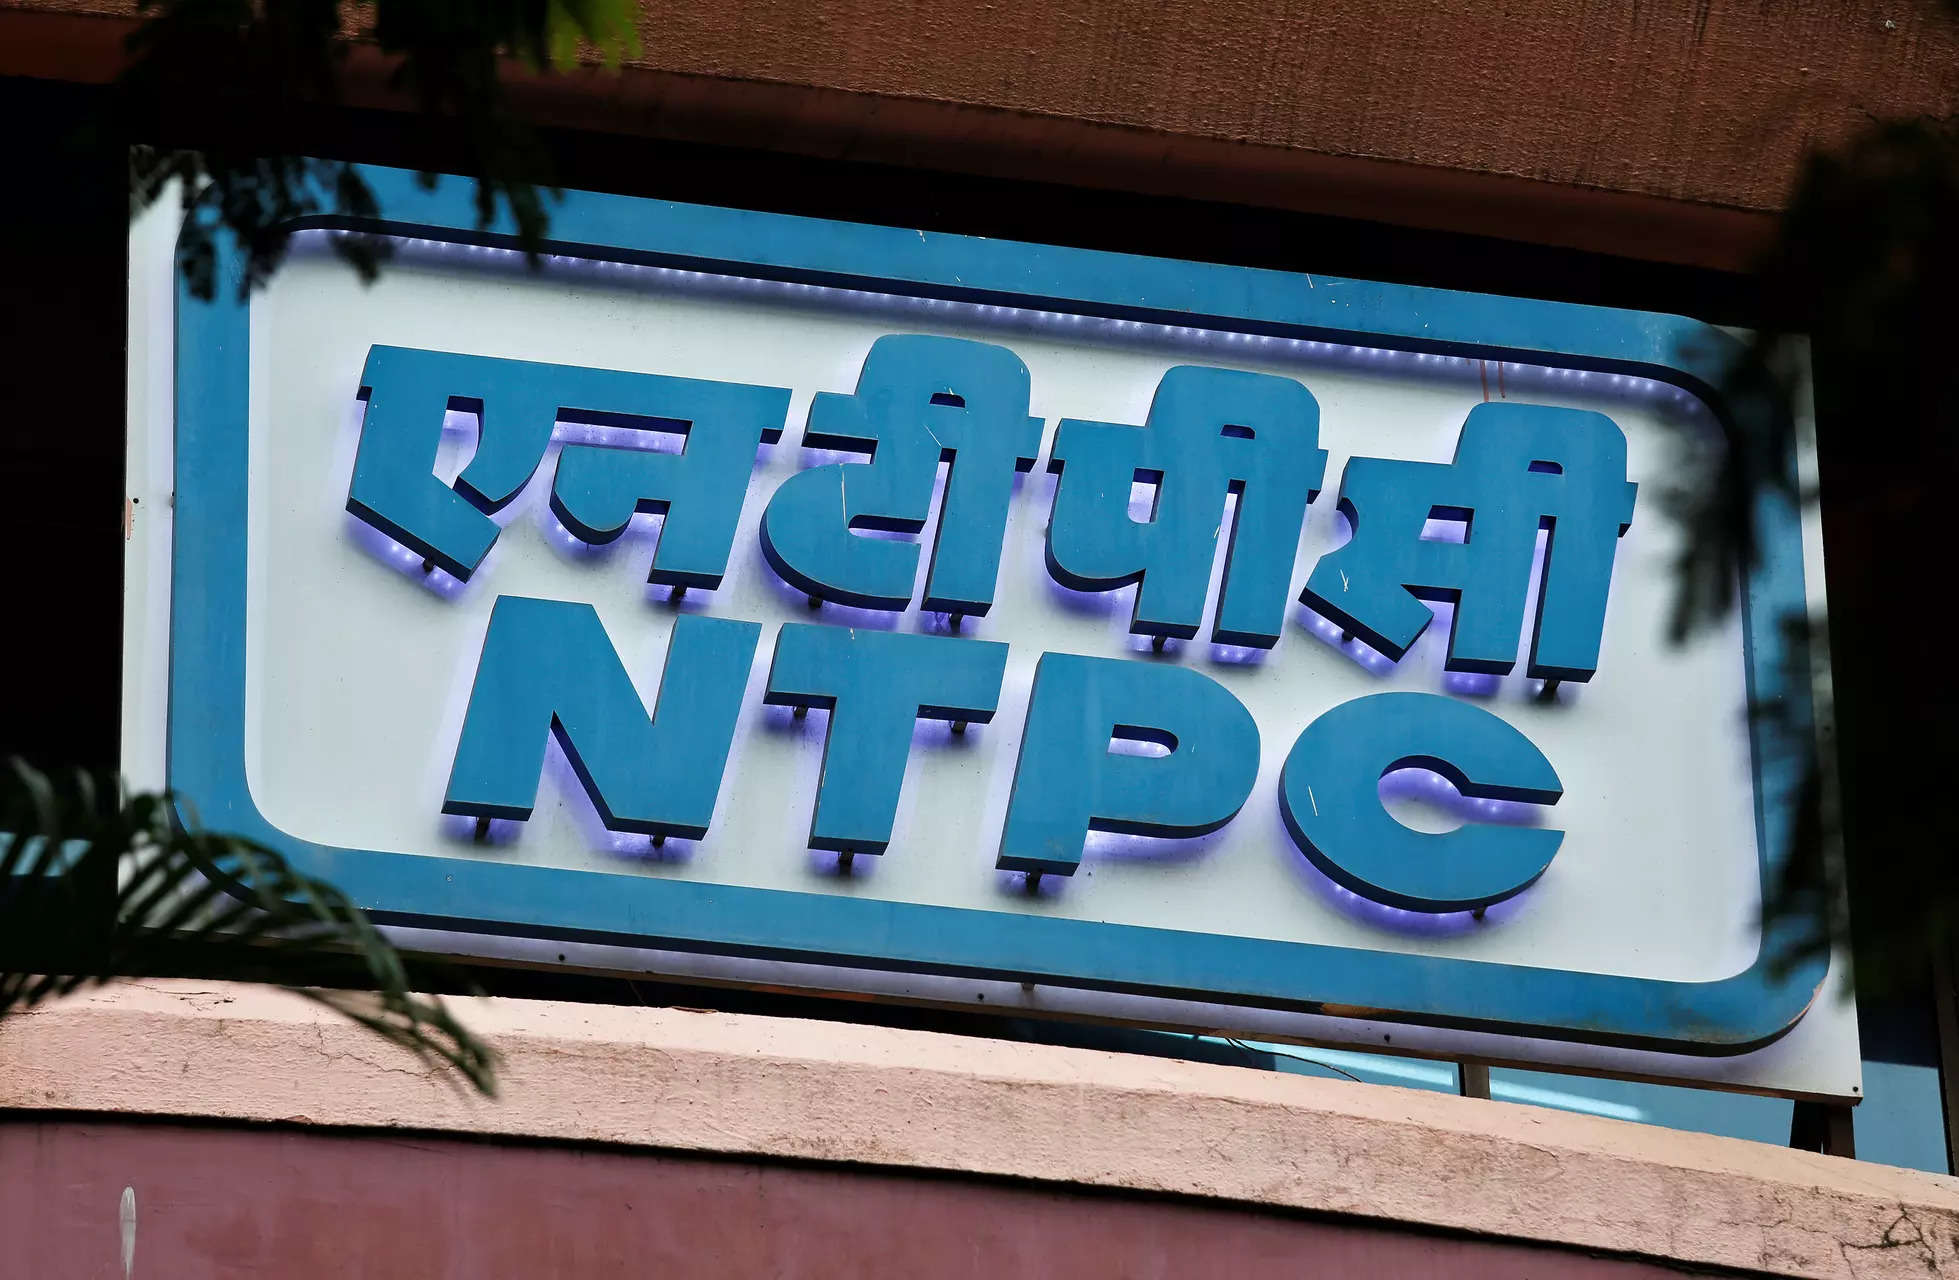 NTPC Green finalises four investment banks for Rs 10,000 crore IPO: Report, ET EnergyWorld